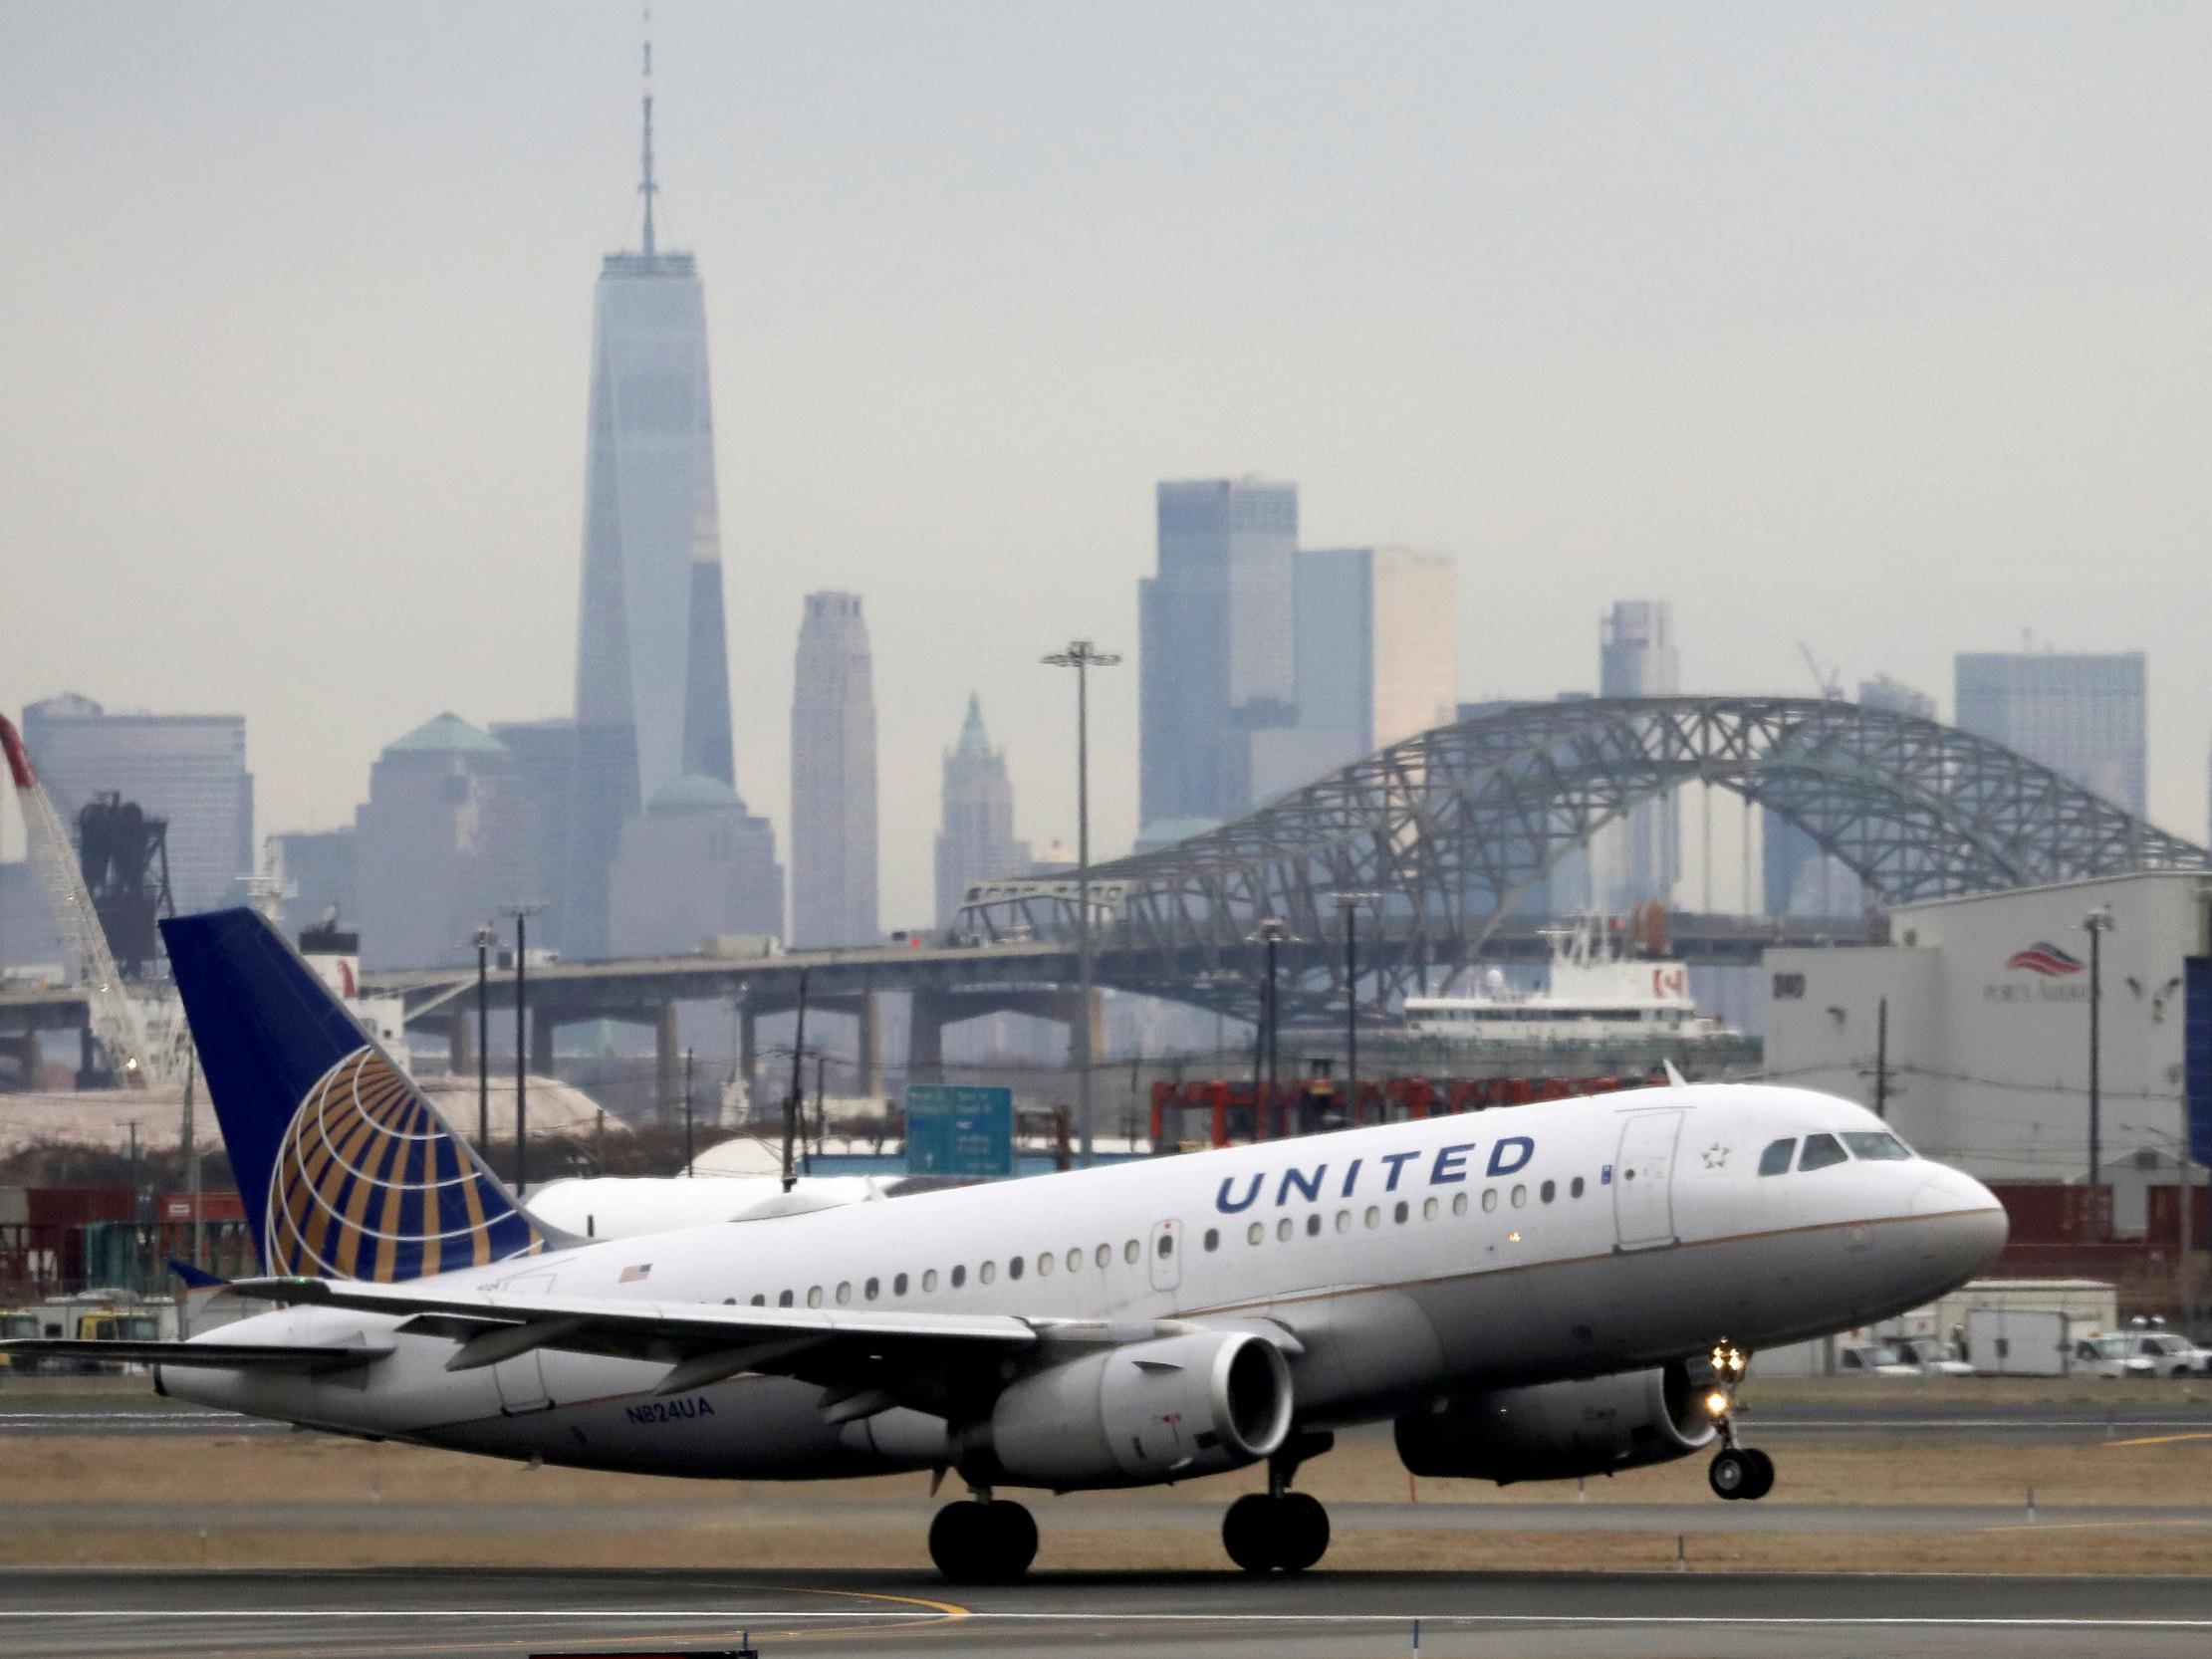 A United Airlines Airbus passenger jet at Newark Liberty International Airport (stock image)